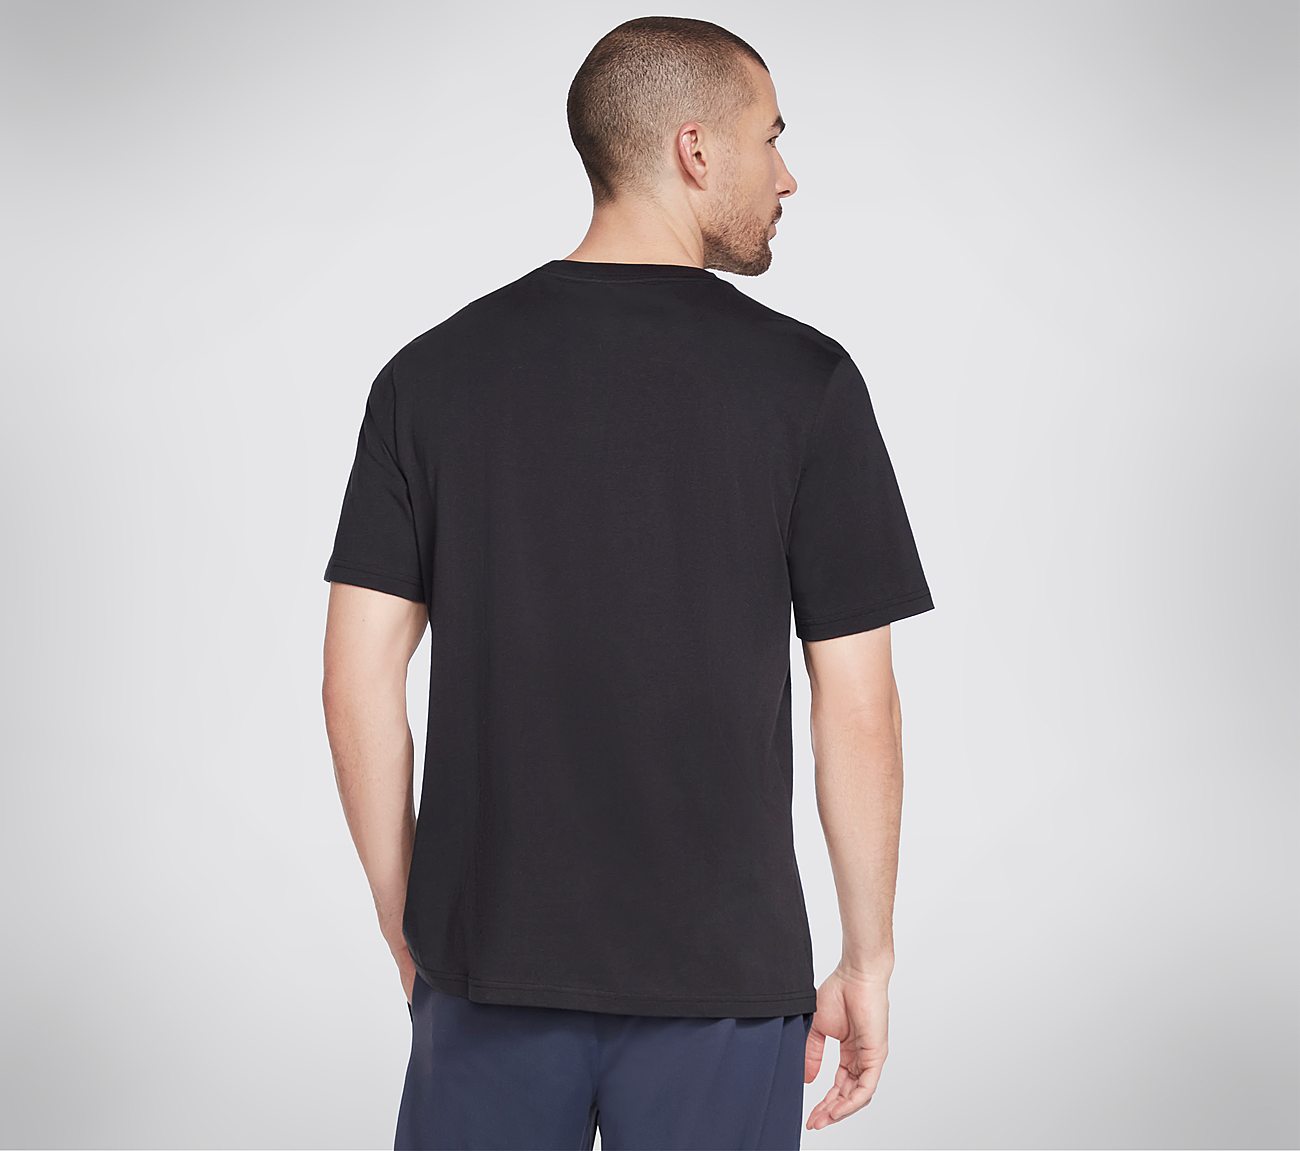 SKECHERS RECHARGE SS TEE, BBBBLACK Apparel Top View